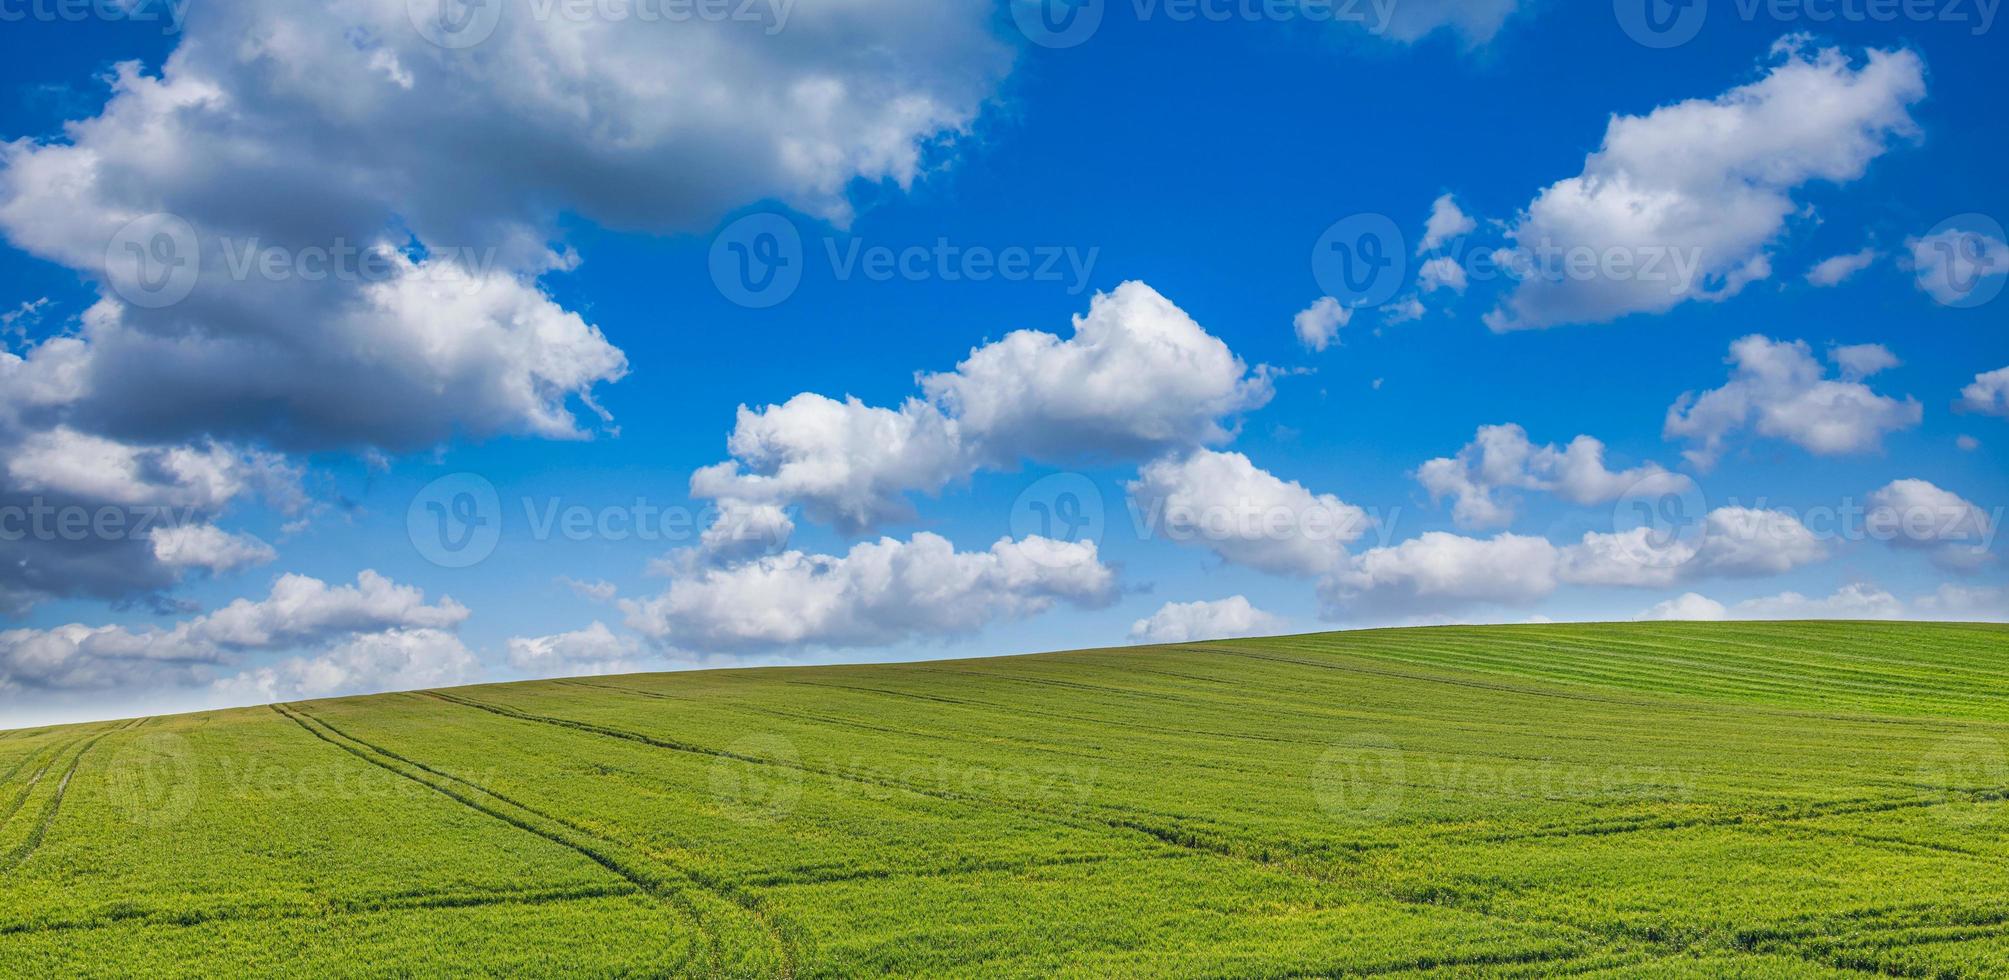 Happy blue sky, horizon and farm fields. Tranquil spring summer nature landscape. Idyllic agriculture hill green meadow. Peaceful positive energy, good mood sunny rural. Relaxing peaceful countryside photo